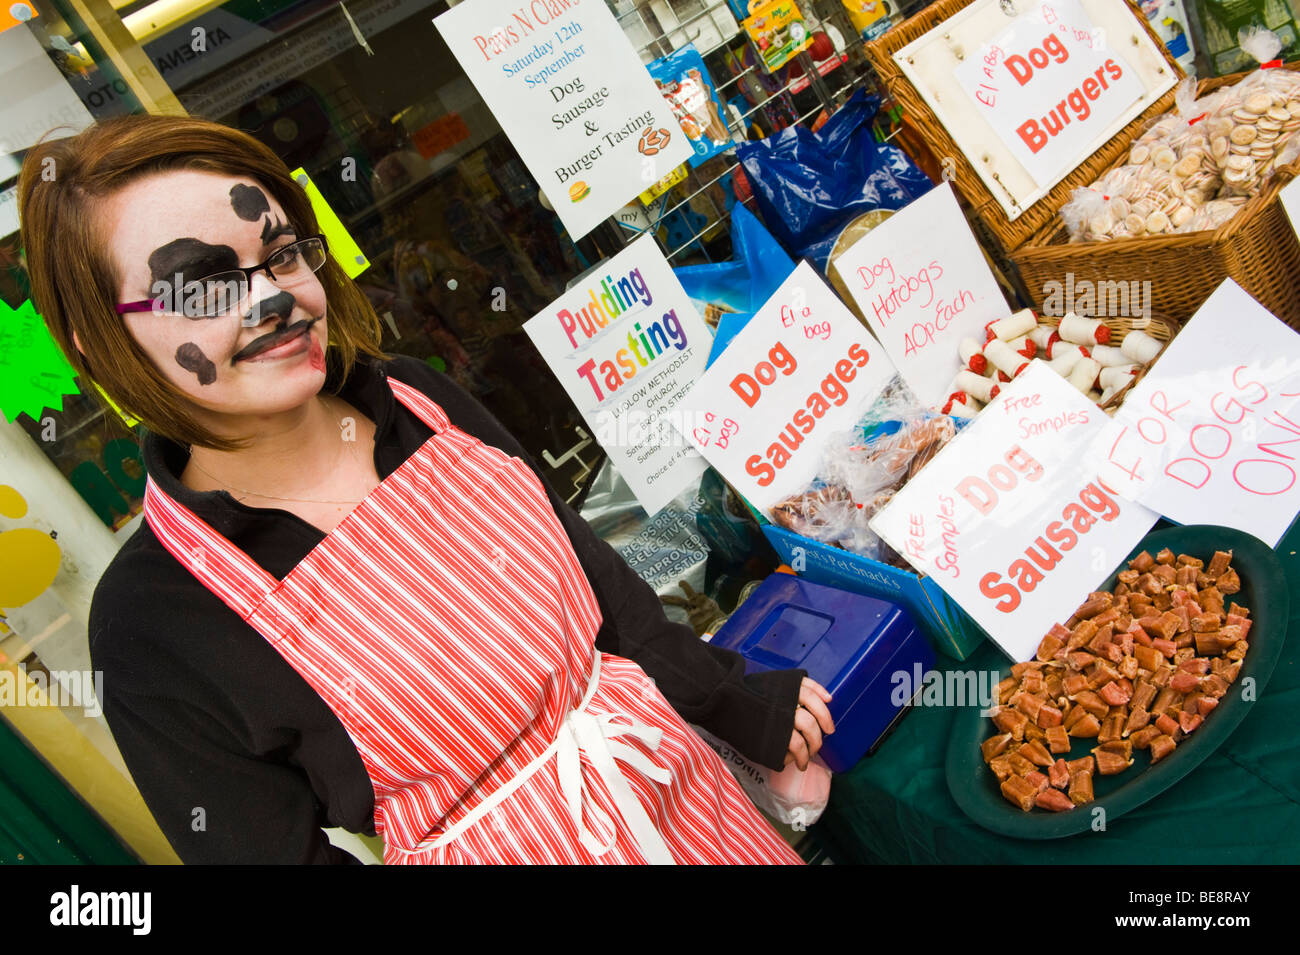 Pet shop selling dog treats with teen assistants made up as dalmatians during Ludlow Food Festival Shropshire England UK Stock Photo